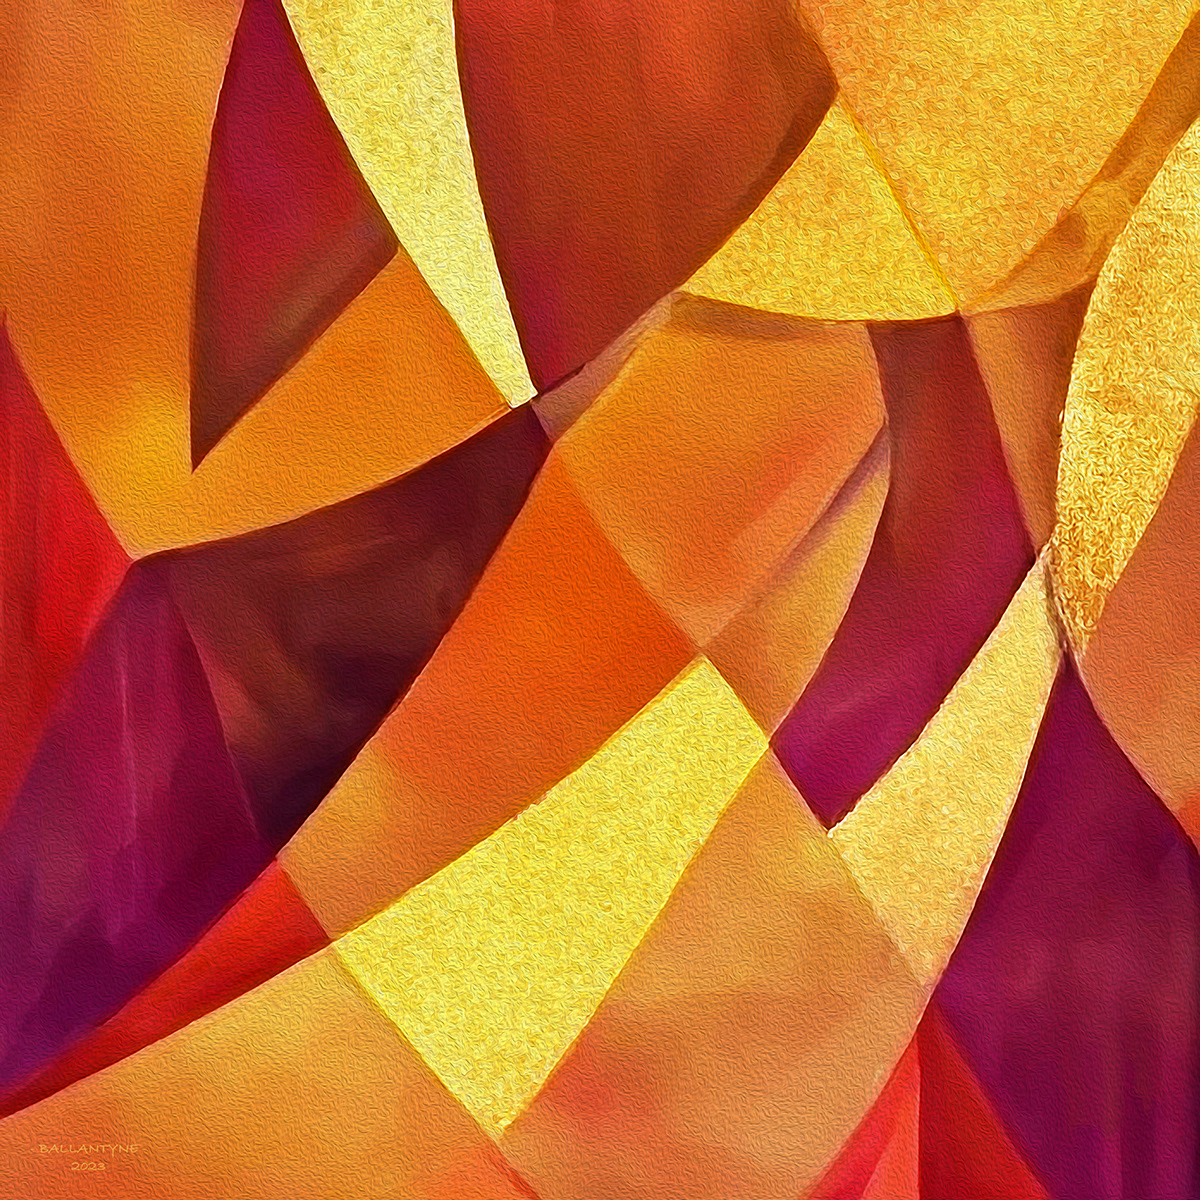 Abstract, golden, gilded, gold design for pillows, cushions, covers, mugs, greeting cards, tote bags